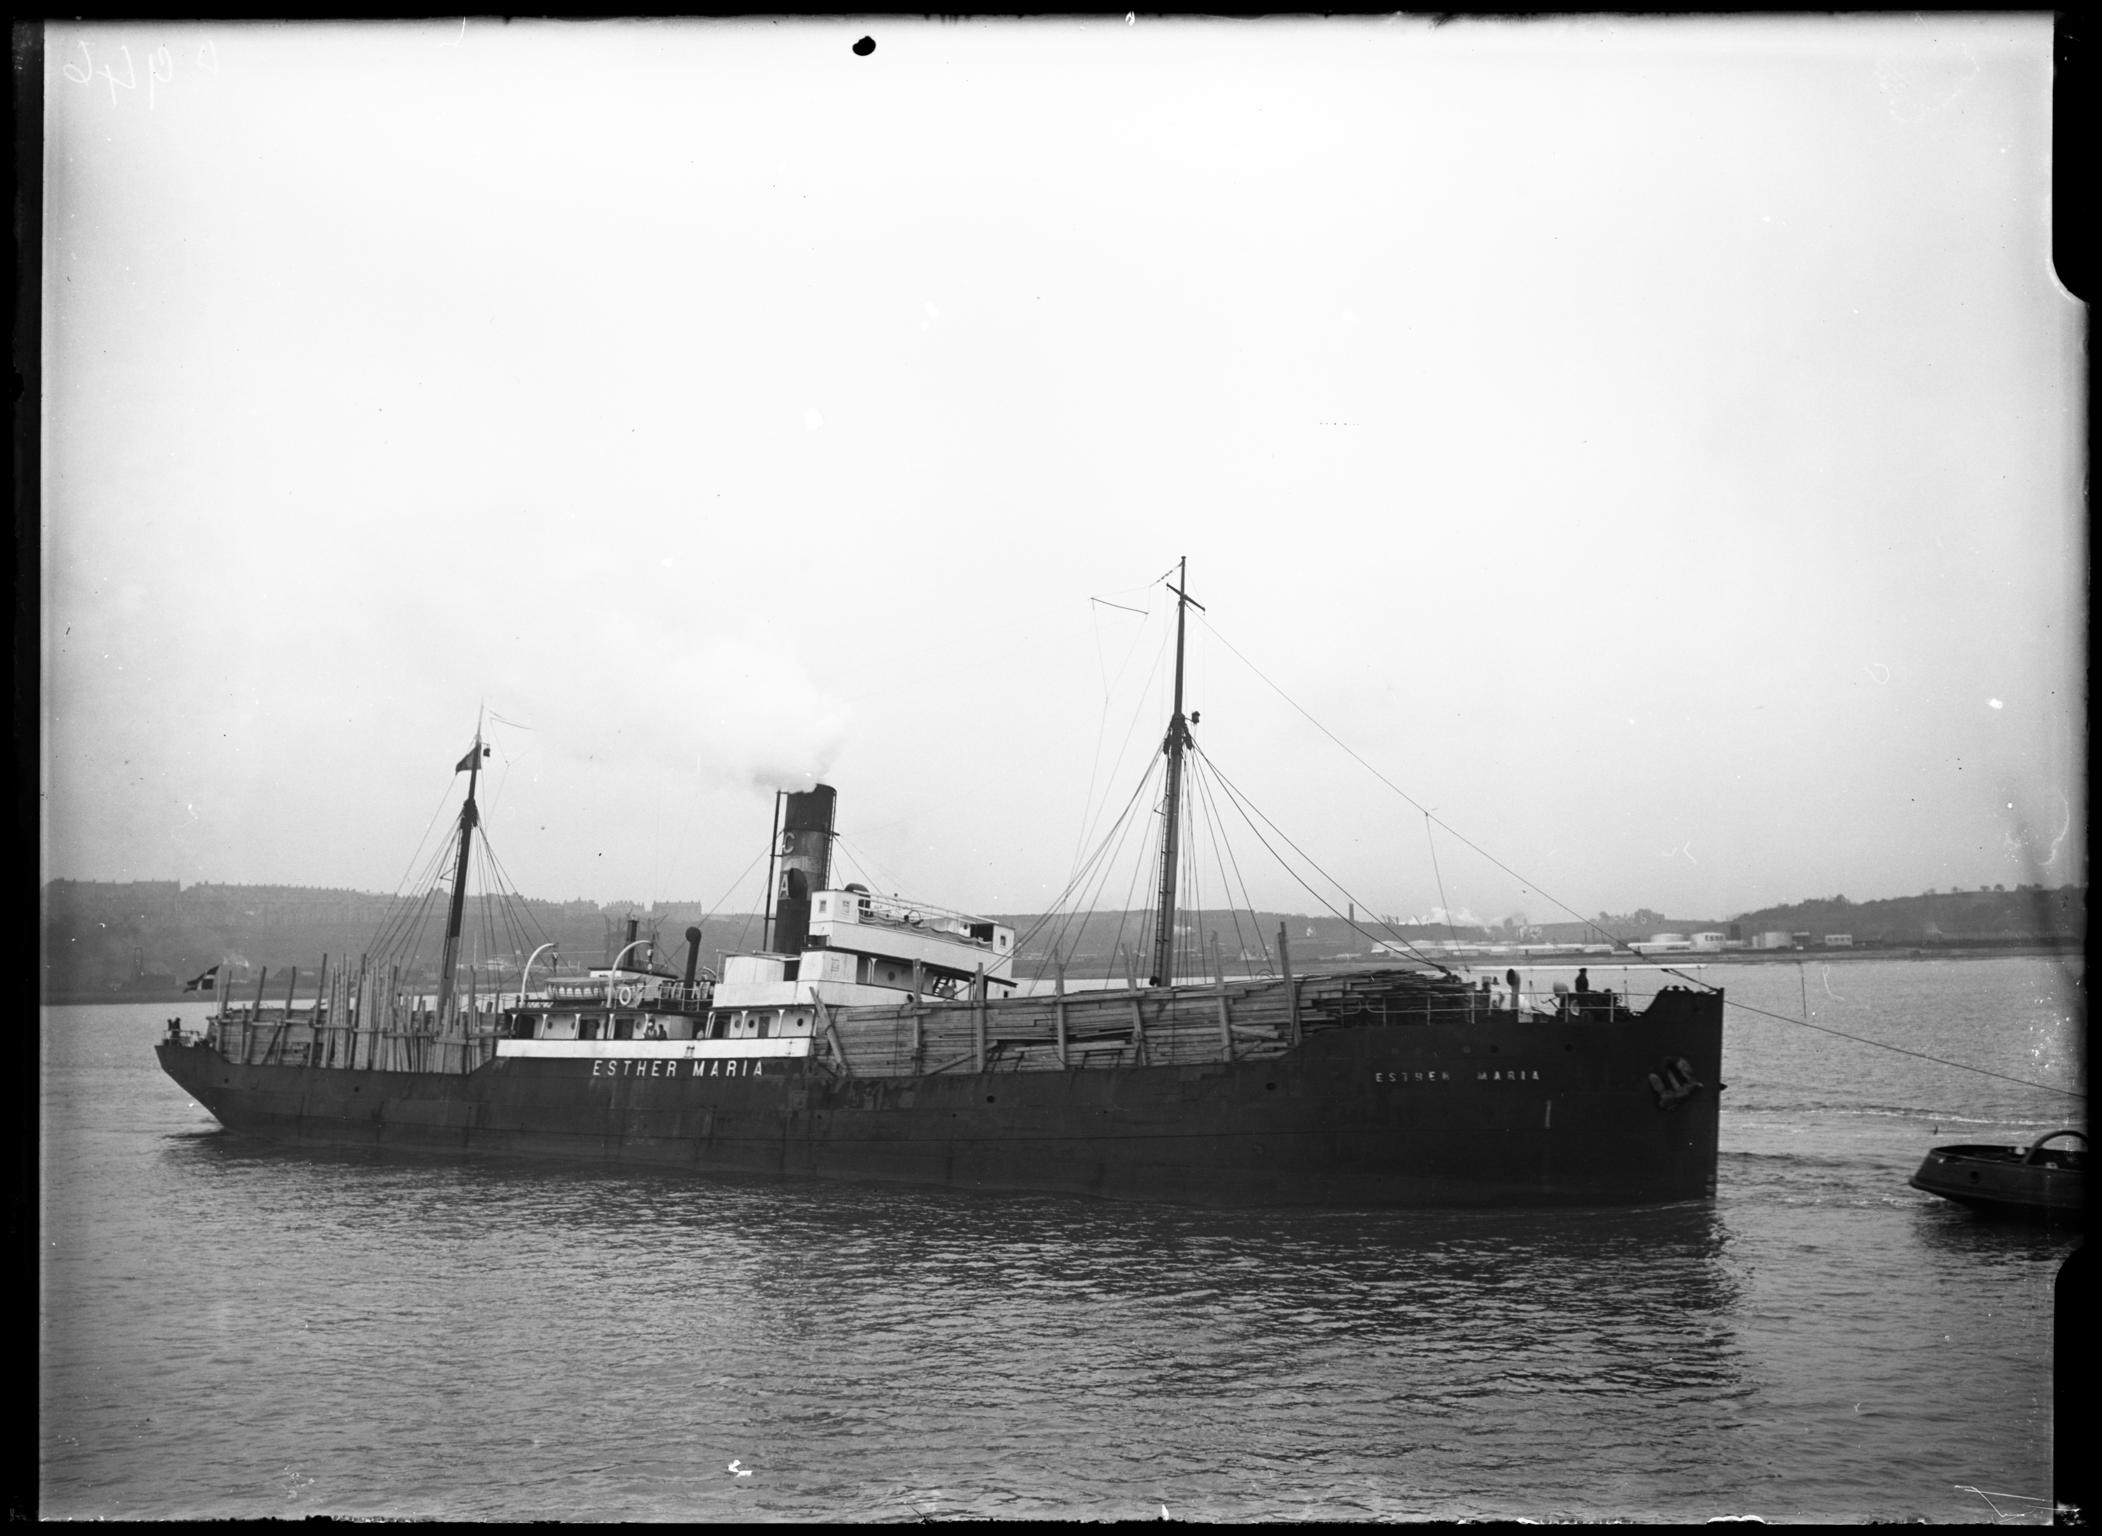 S.S. ESTHER MARIA, glass negative